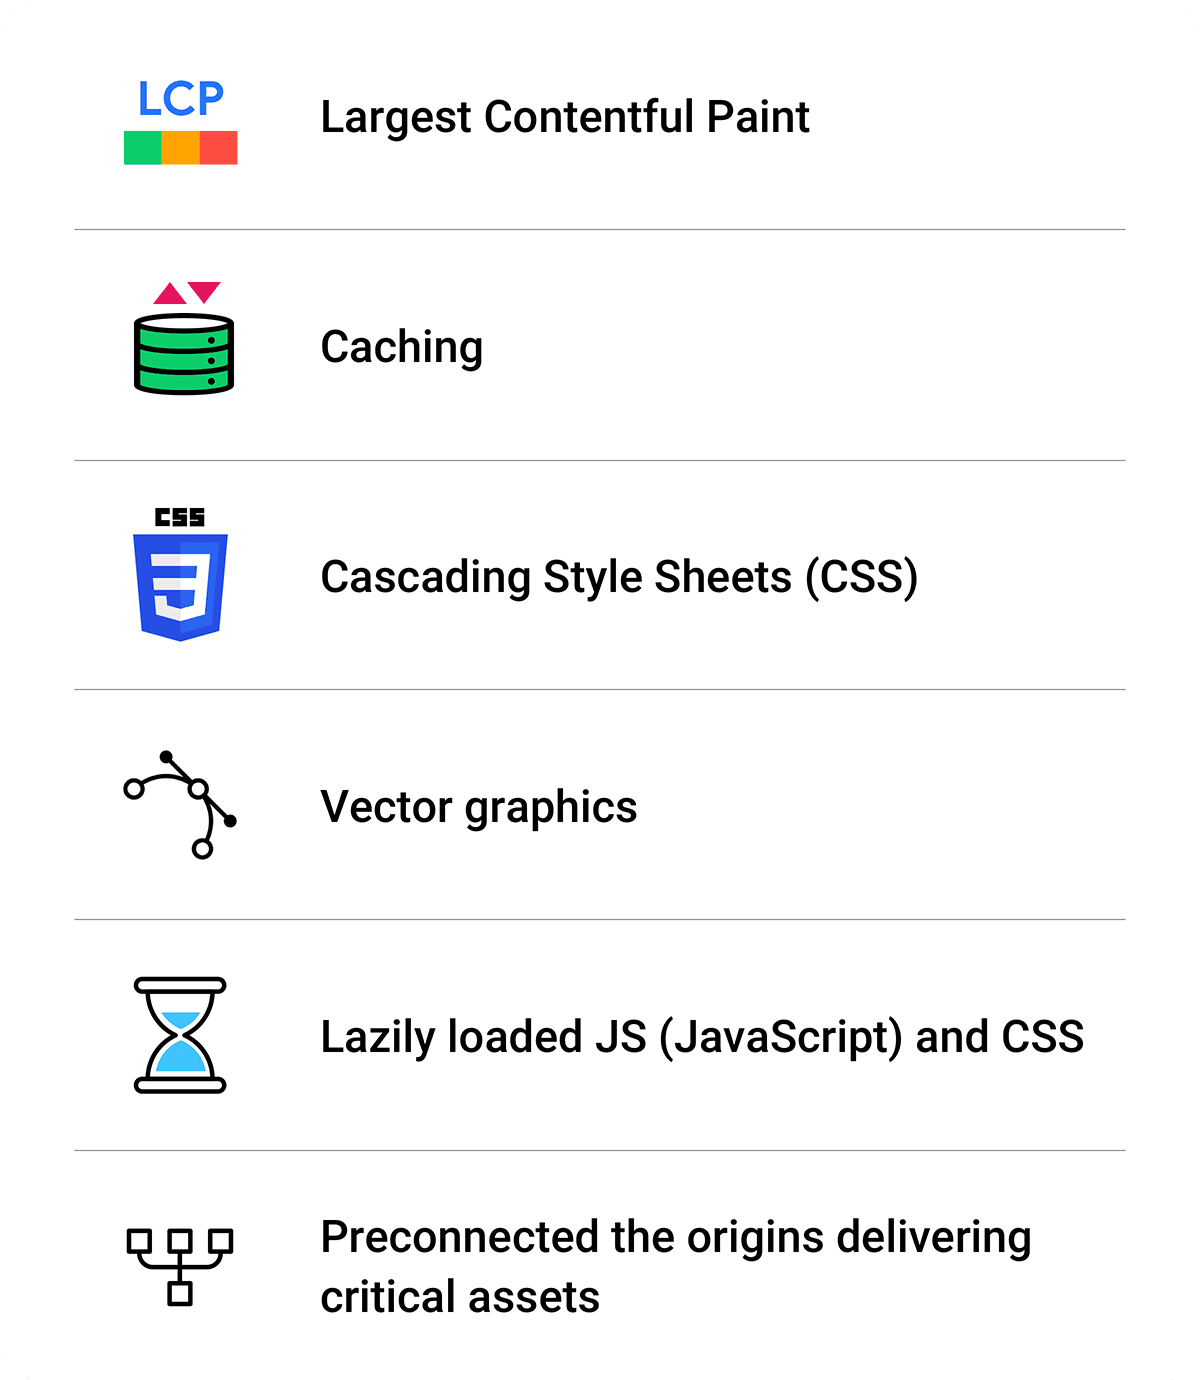 A summary of the optimizations: Largest Contentful Paint, Caching, CSS, vector graphics, lazily loaded JS and CSS, preconnecting.